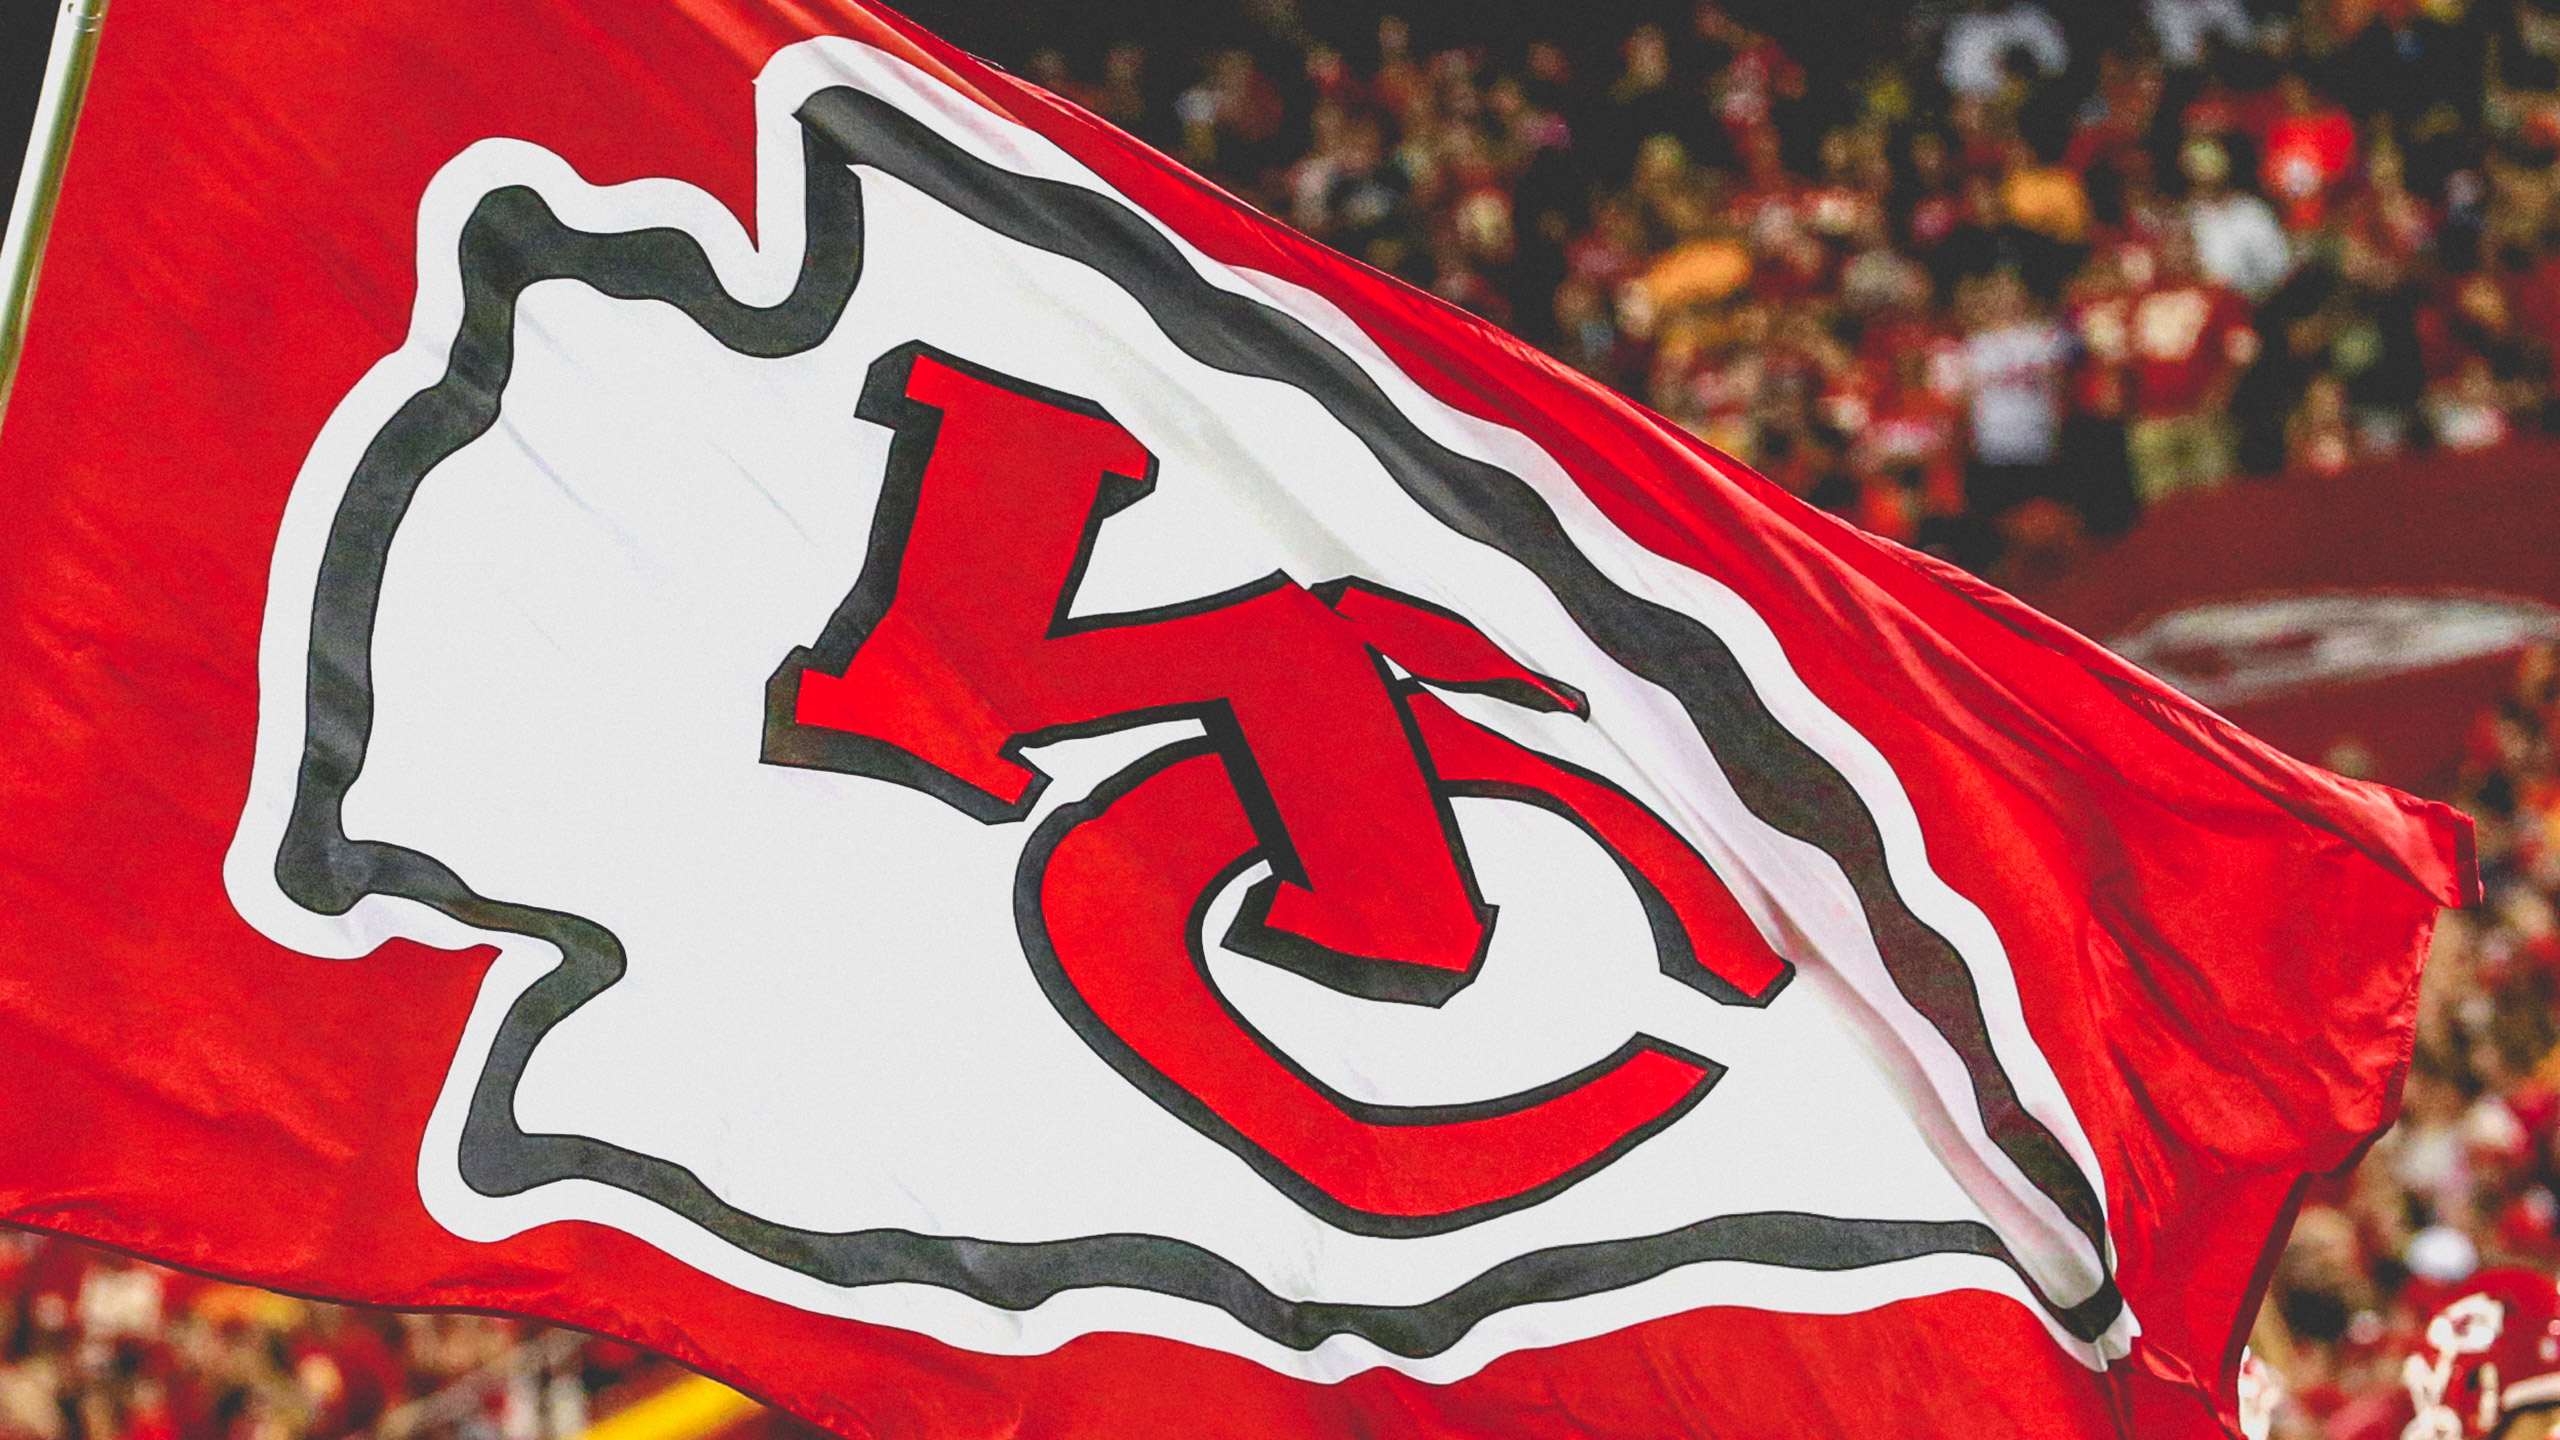 Chiefs Wallpapers Kansas City Chiefs Chiefs Com Snapchat lets you easily talk with friends, view live stories from around the world, and explore news in discover. chiefs wallpapers kansas city chiefs chiefs com